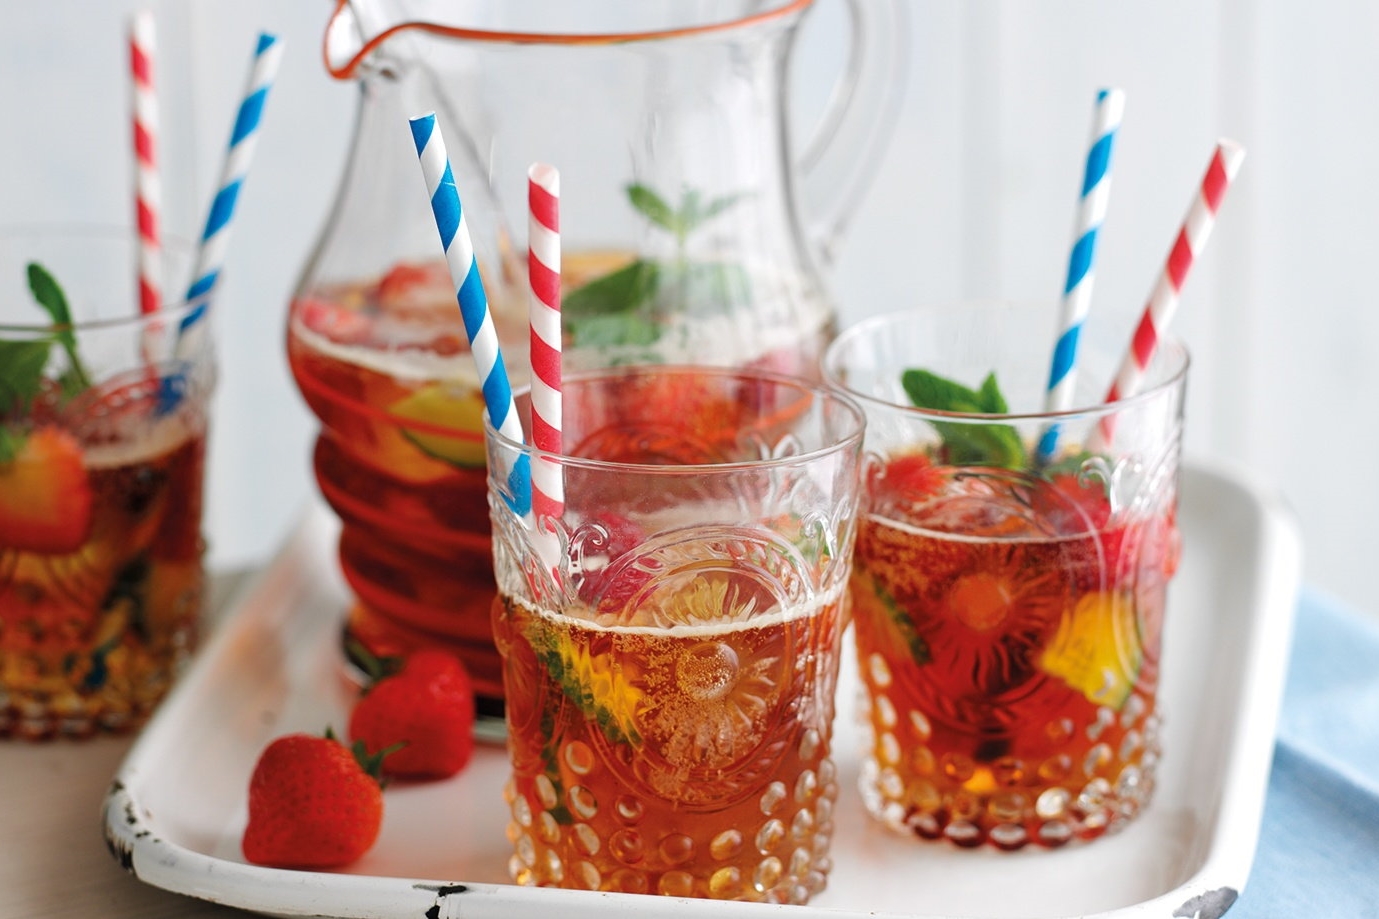 Pimms in glass cups with red and blue straws